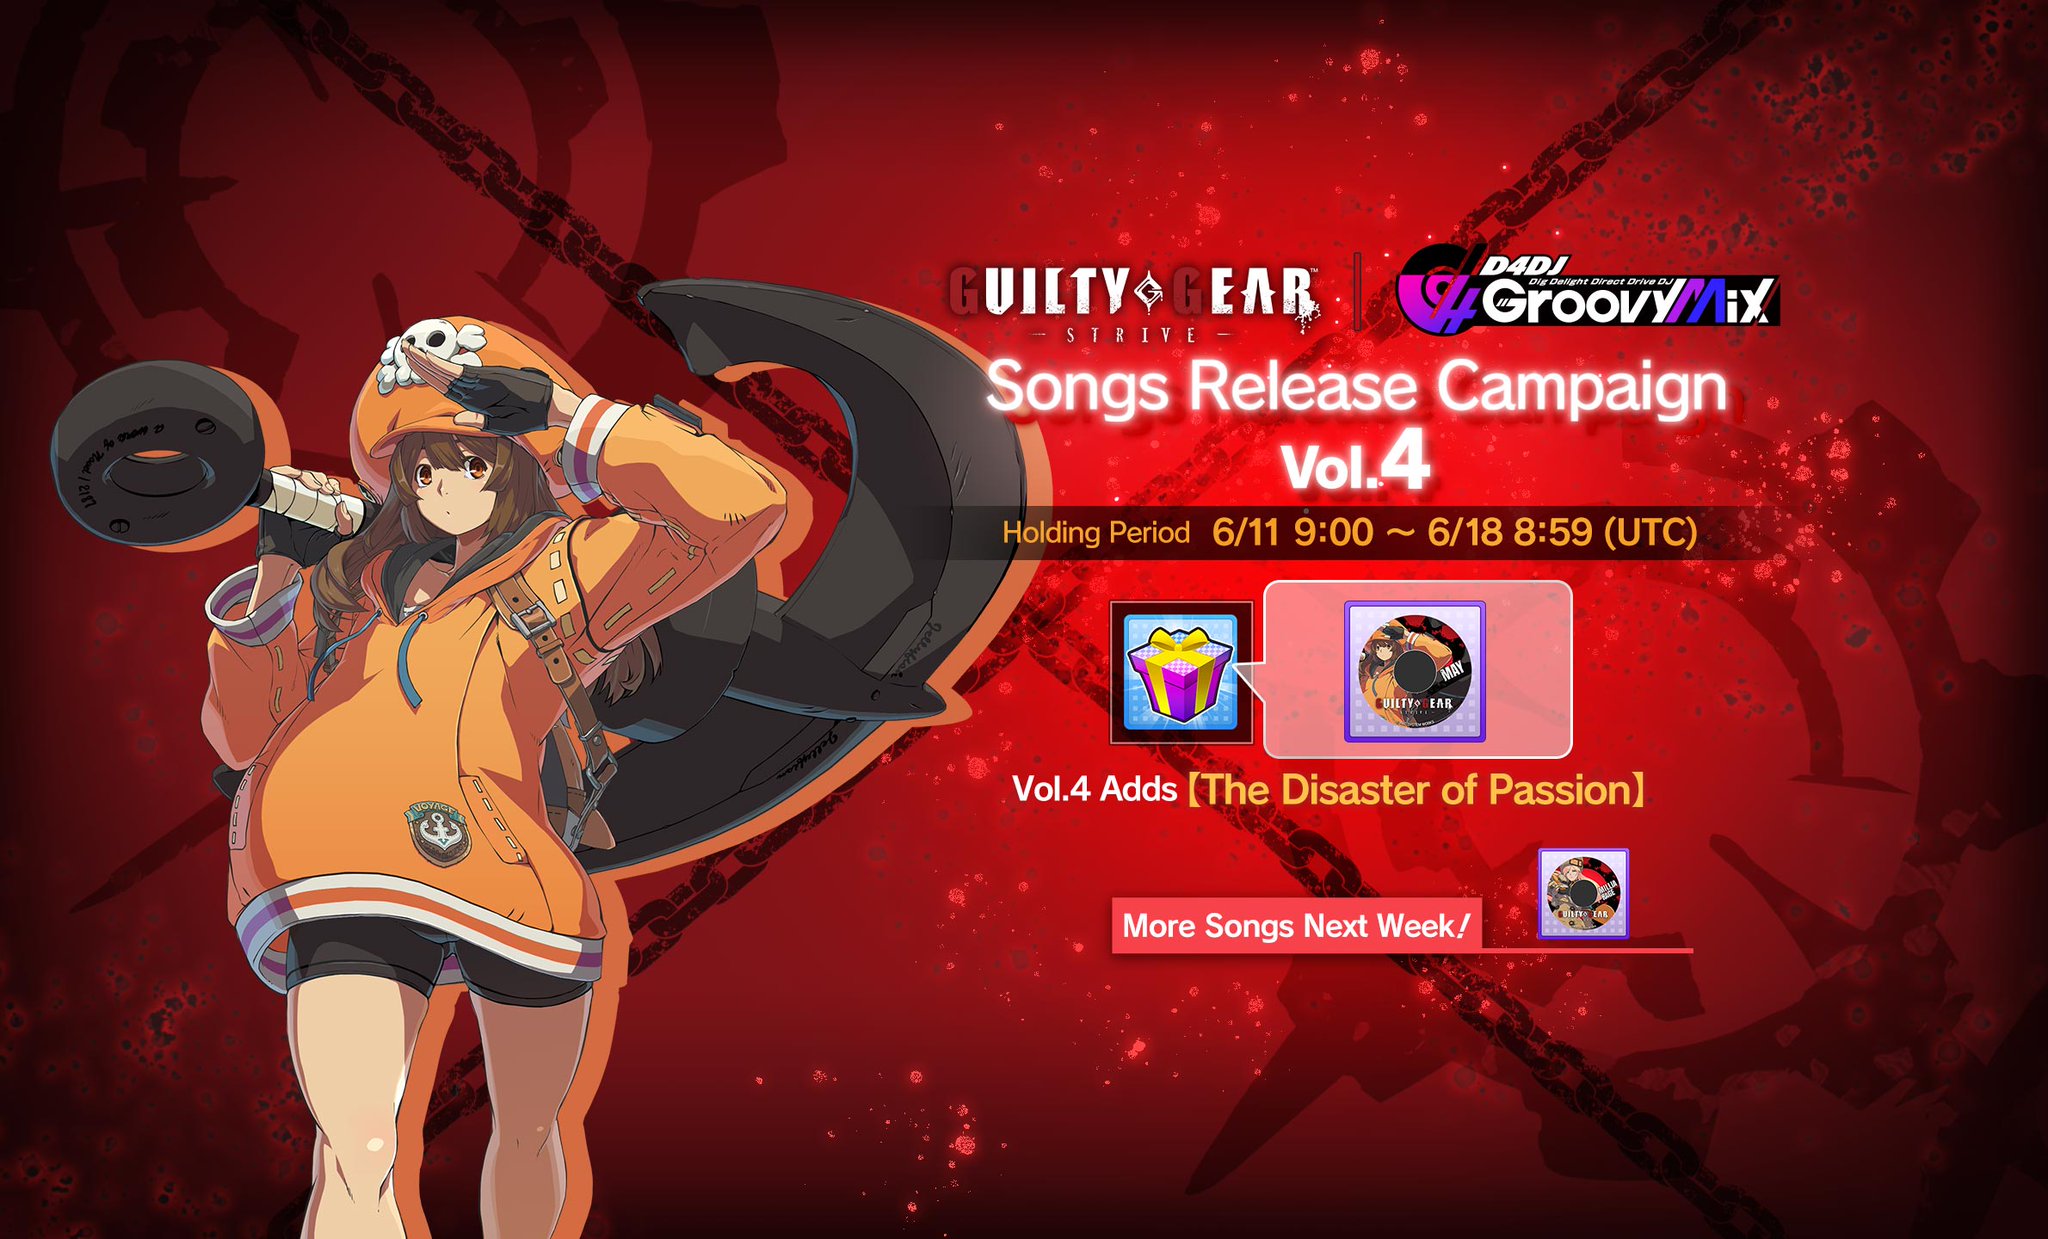 D4DJ Groovy Mix EN on X: 🎉500 SONG CAMPAIGN🎉 To celebrate the